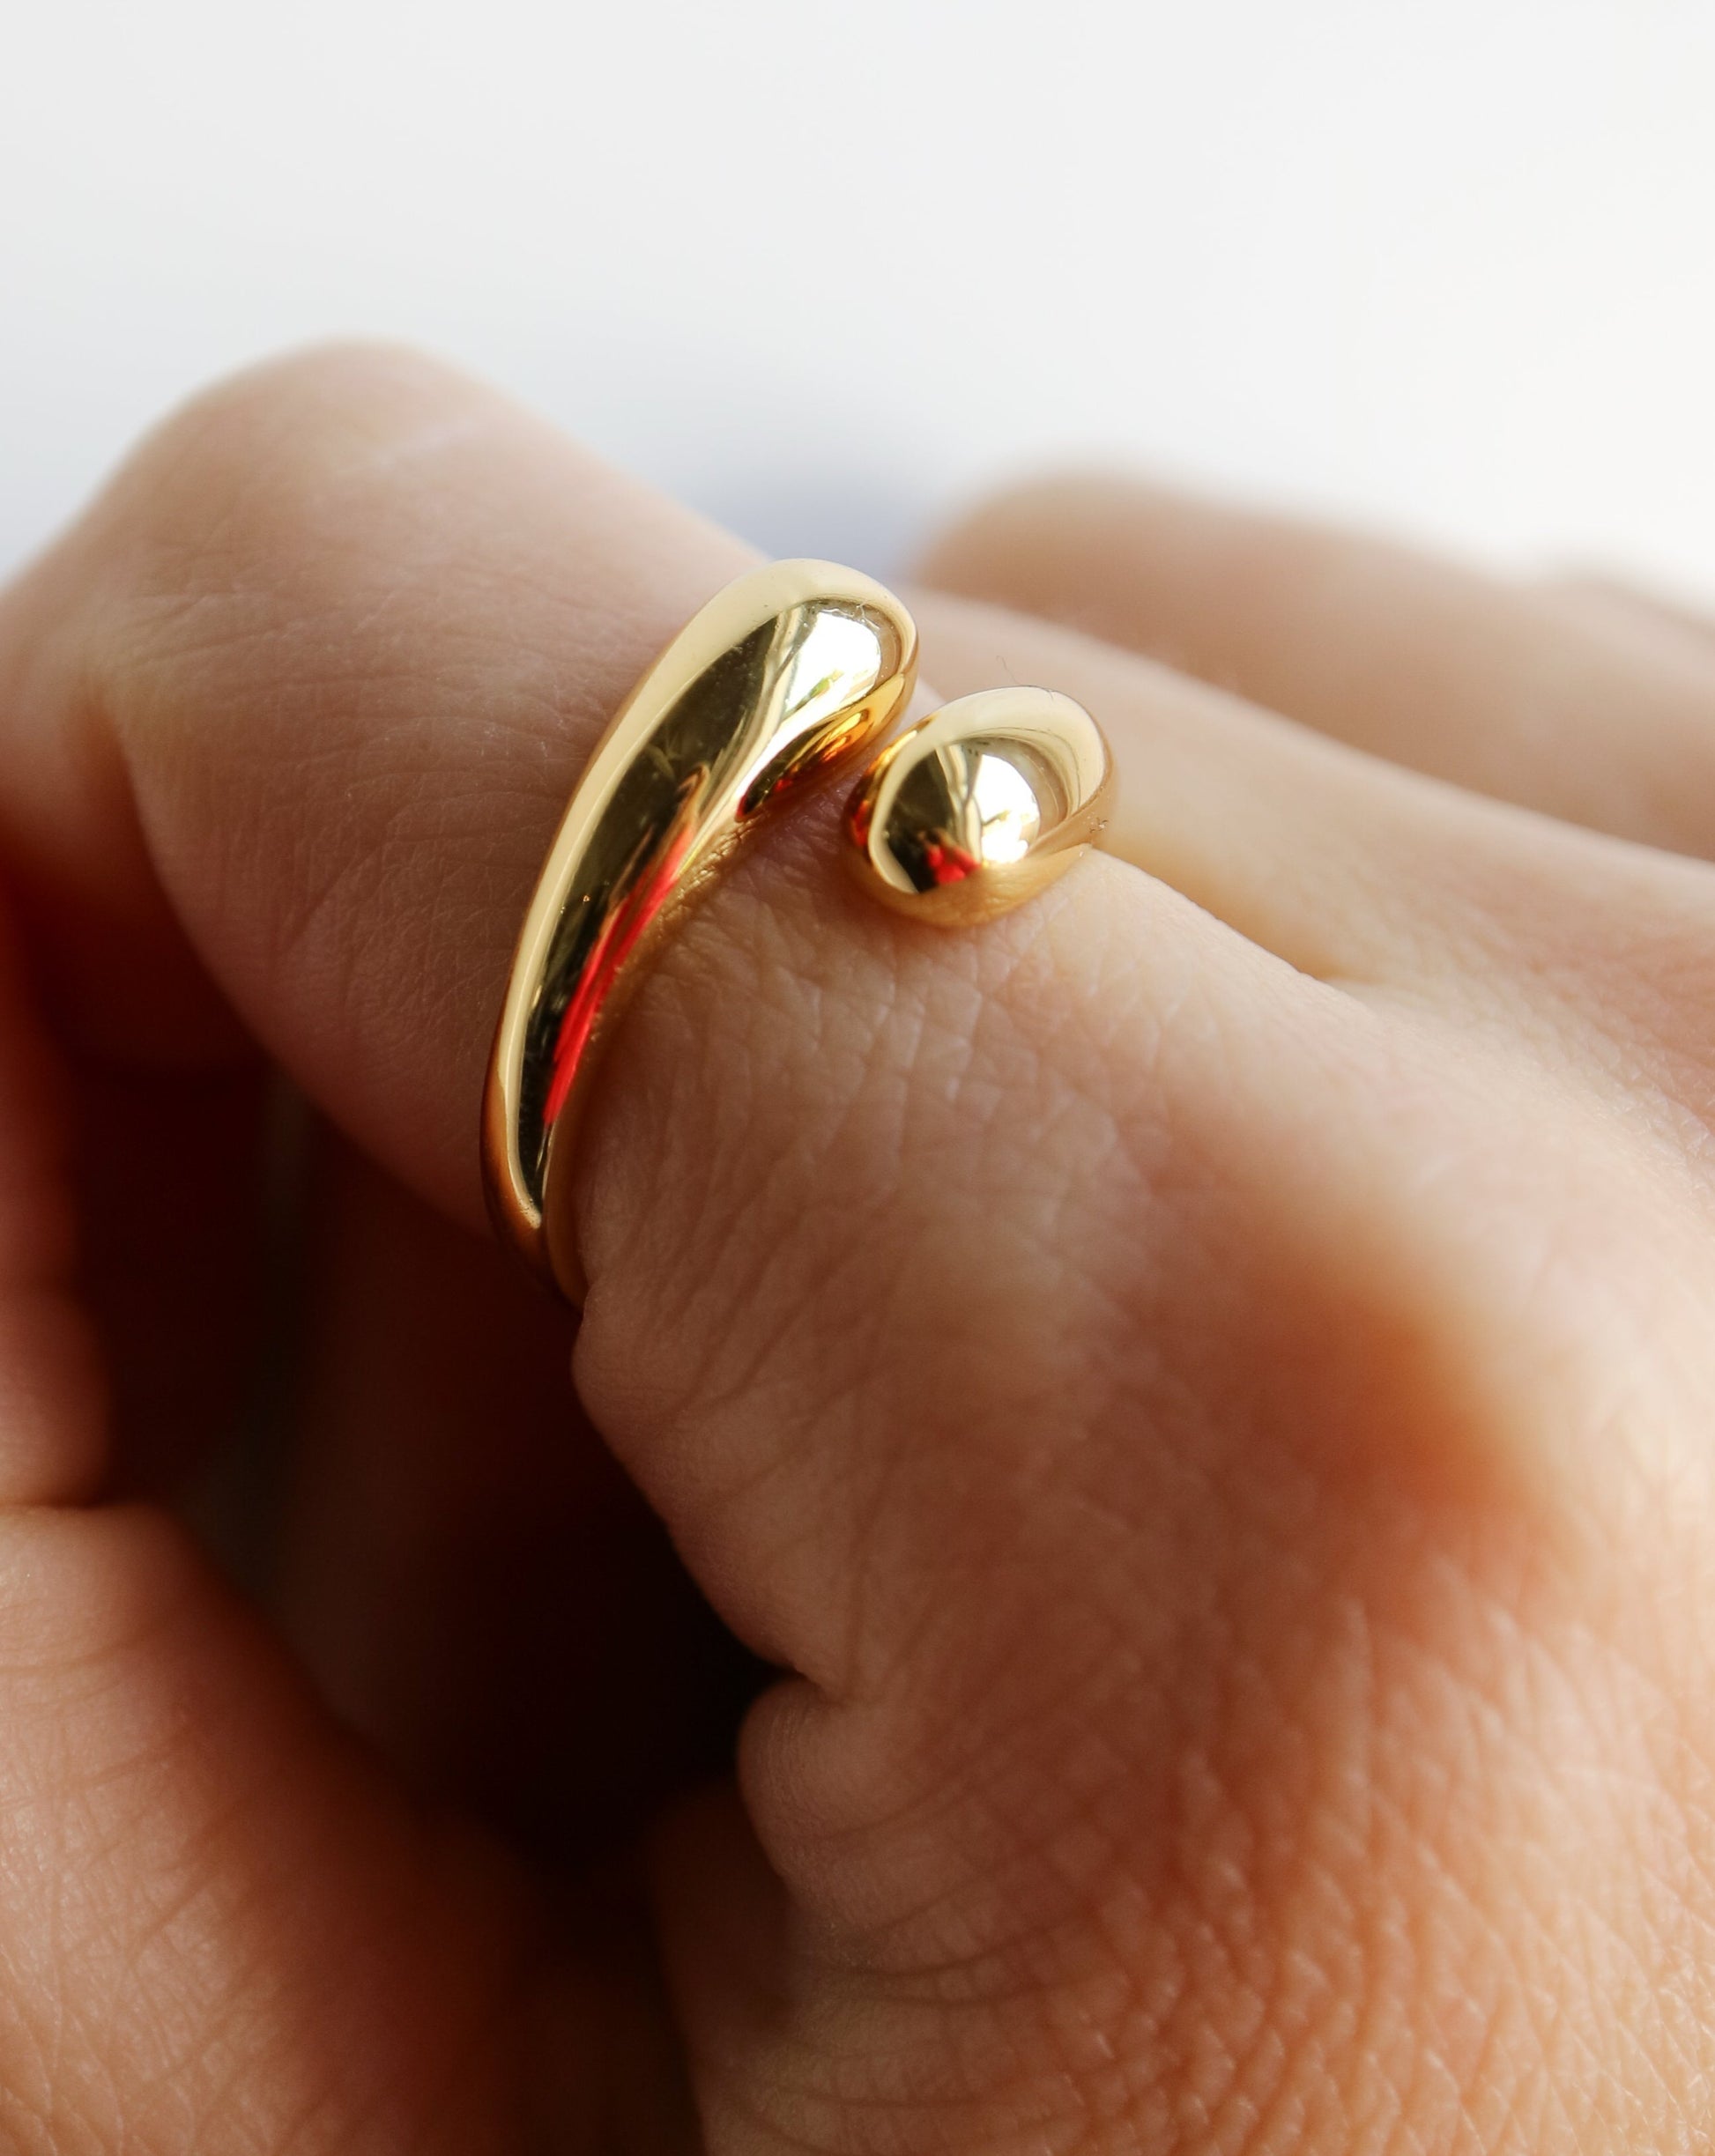 Wrap around gold ring on trend